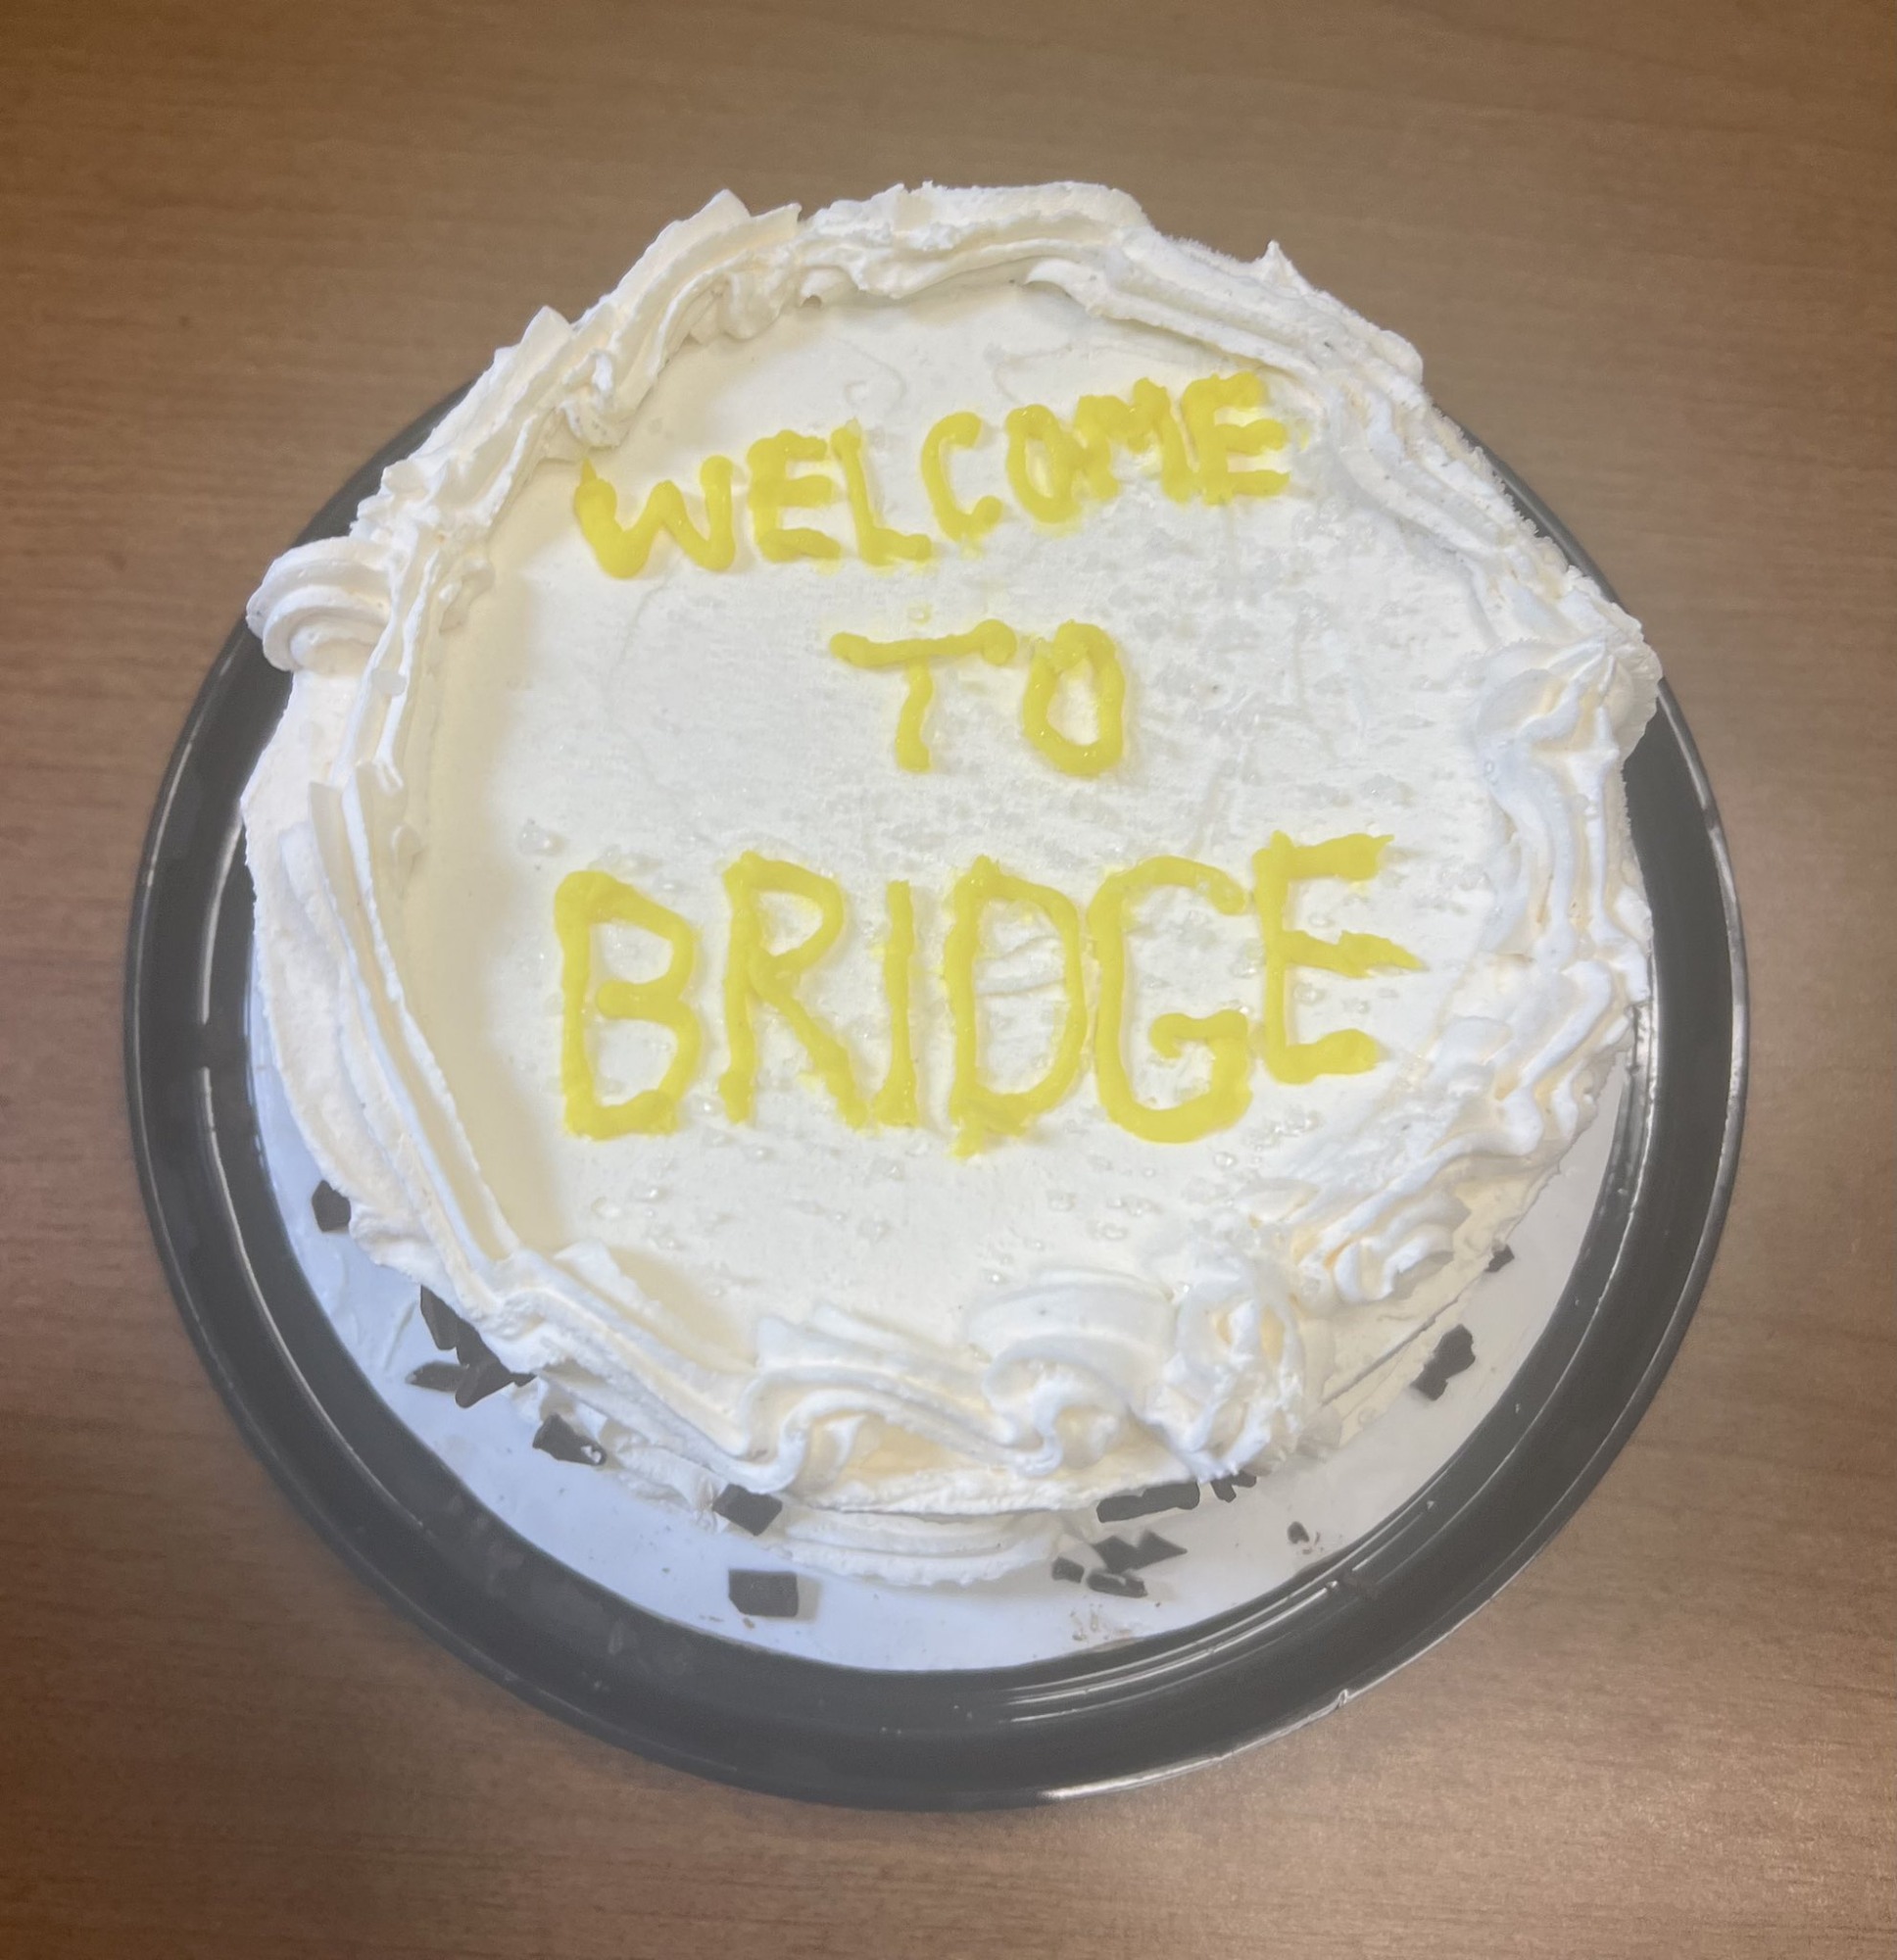 cake with "Welcome to BRIDGE" written in icing